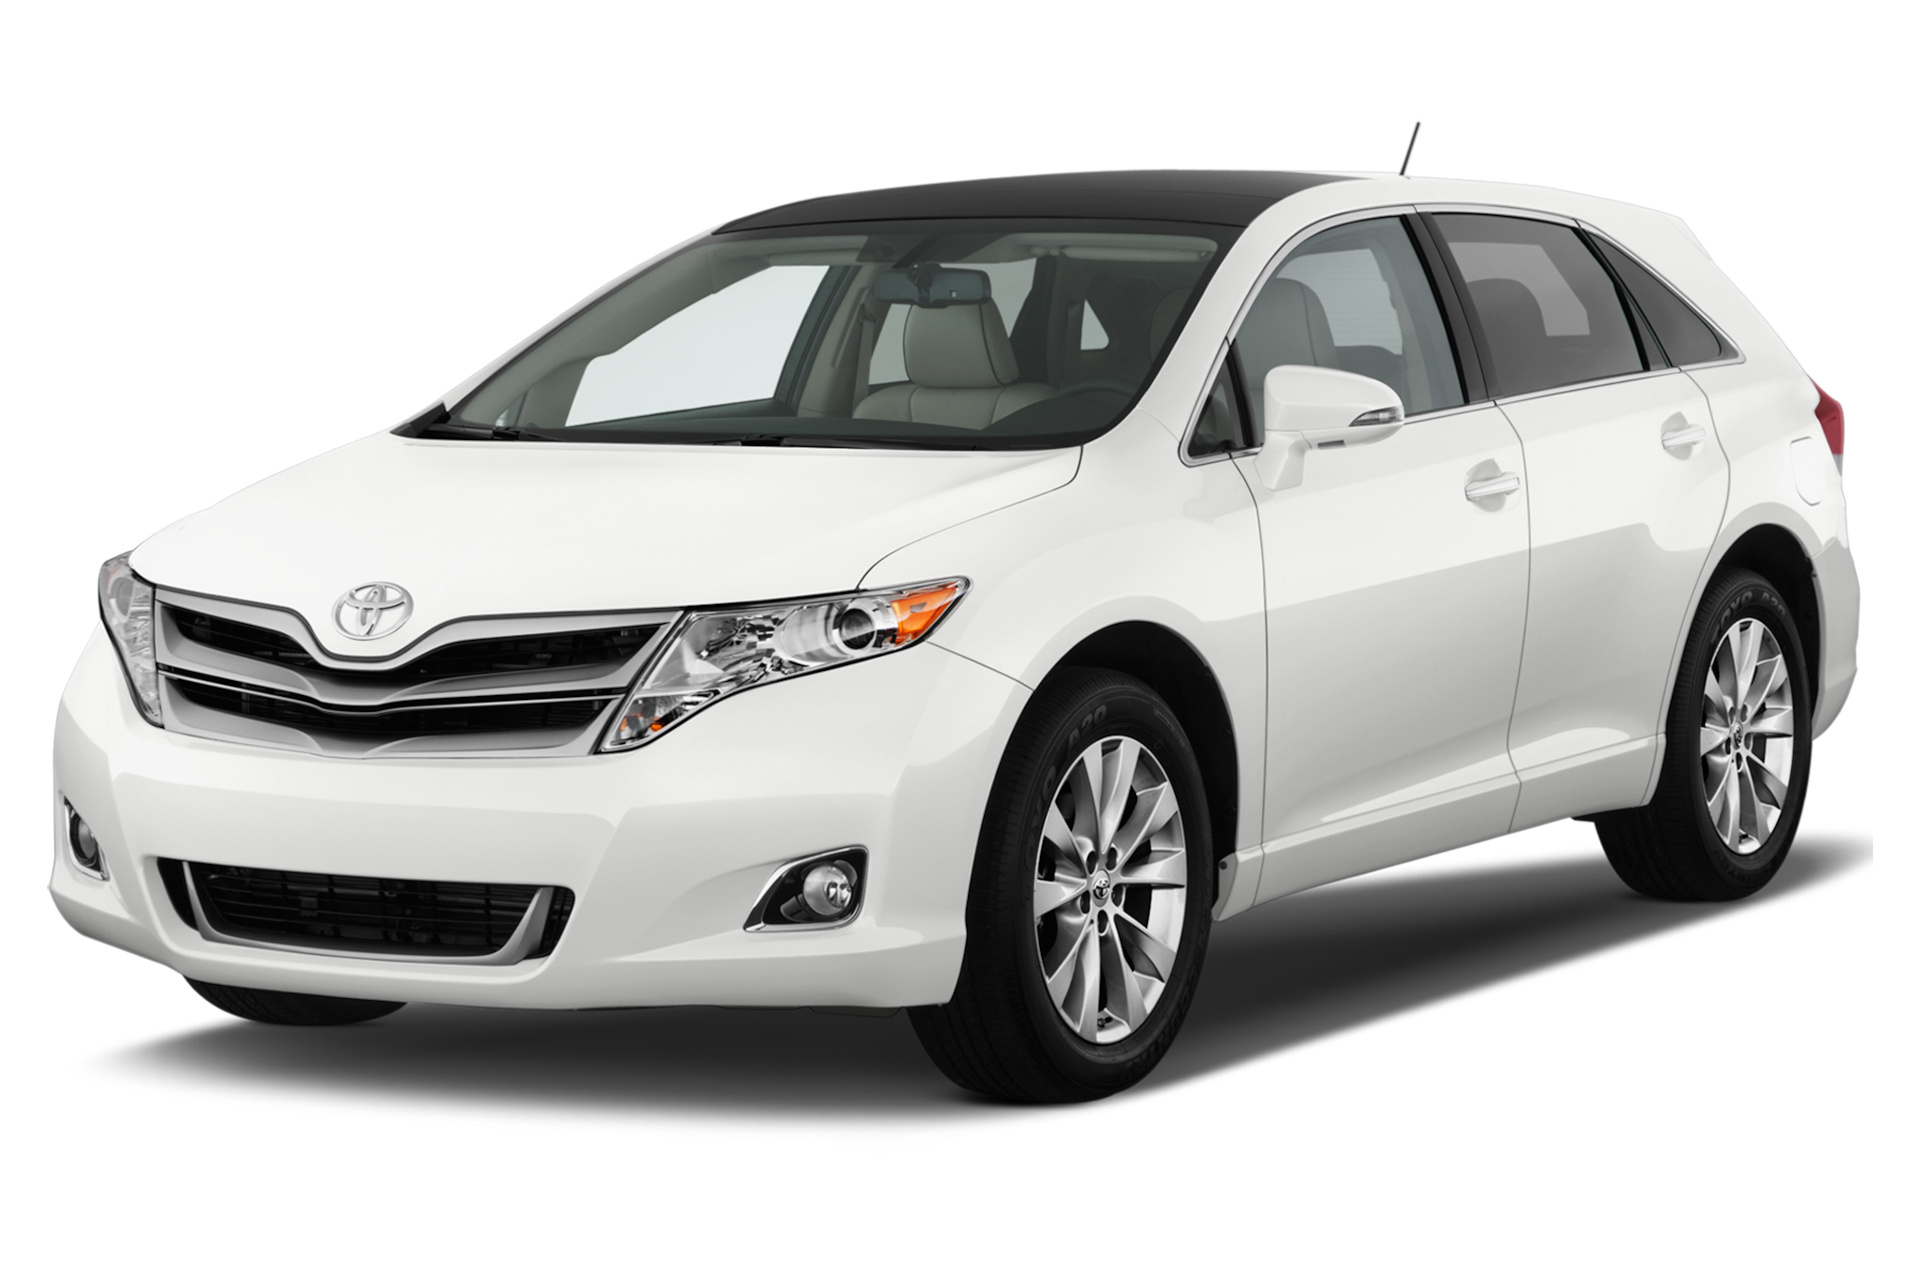 Toyota Venza, Buyer's guide, Reliable and practical, Versatile crossover, 1920x1280 HD Desktop